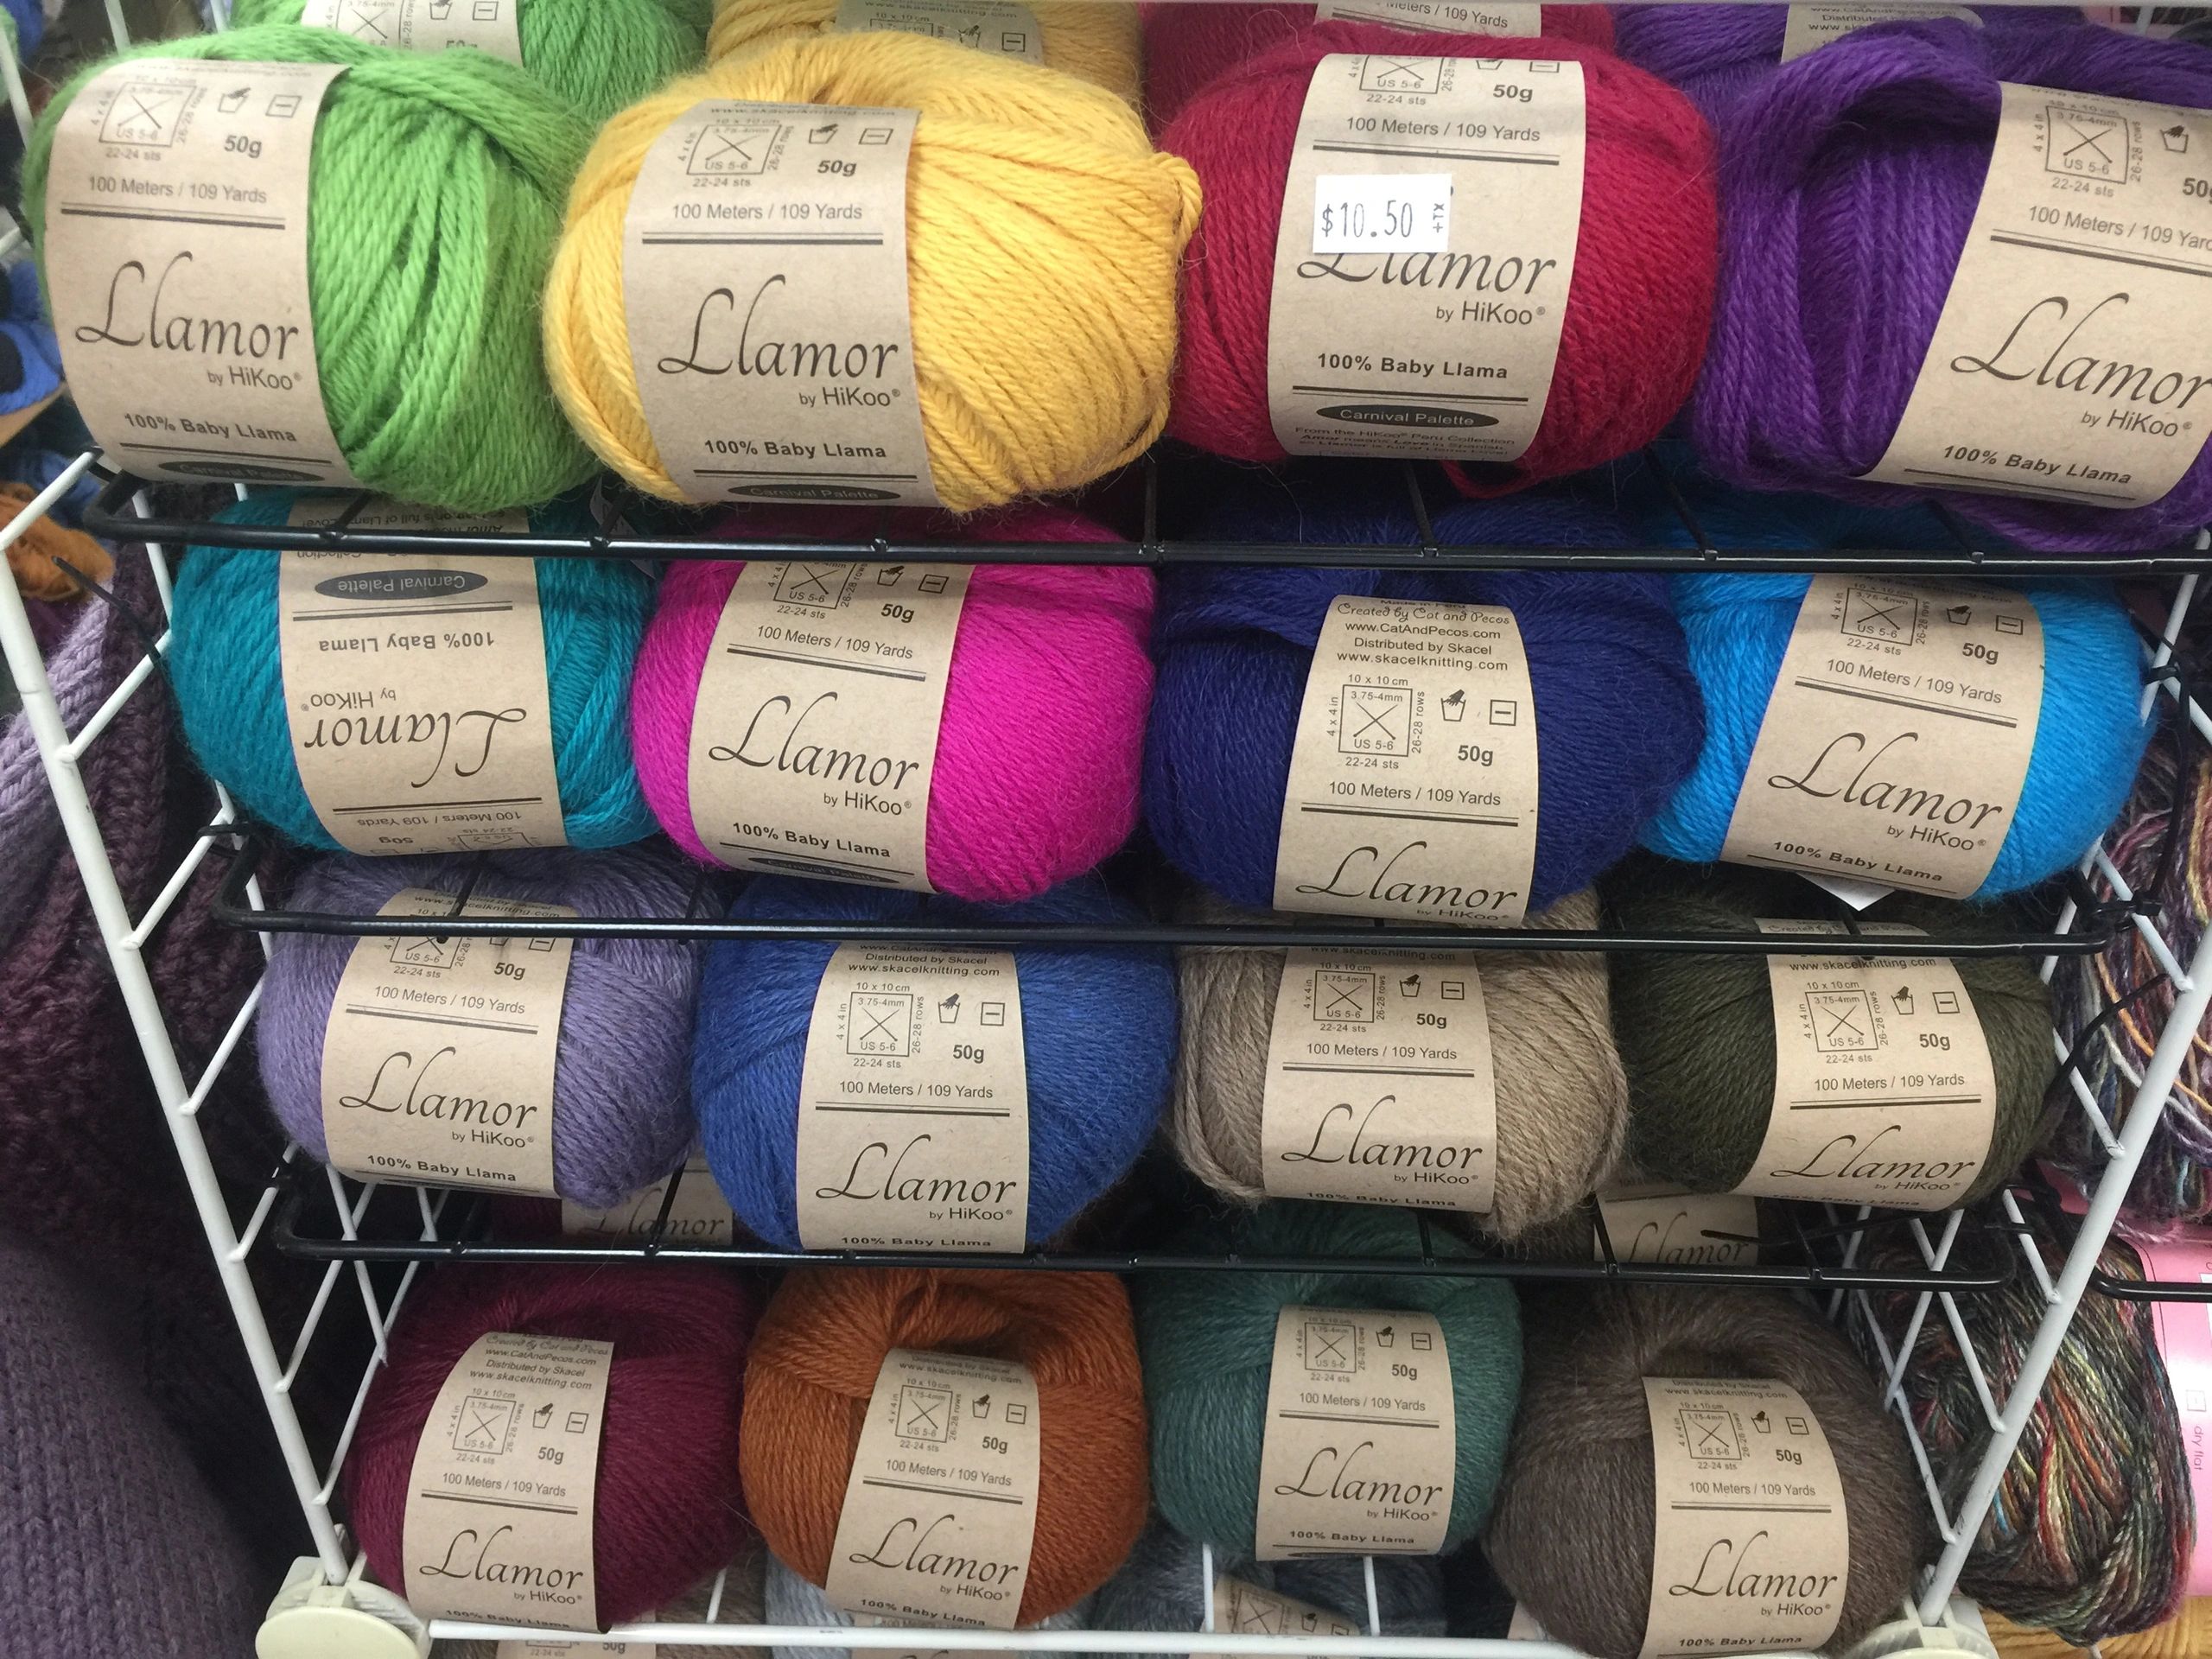 balls of yarn on shelves in various colors